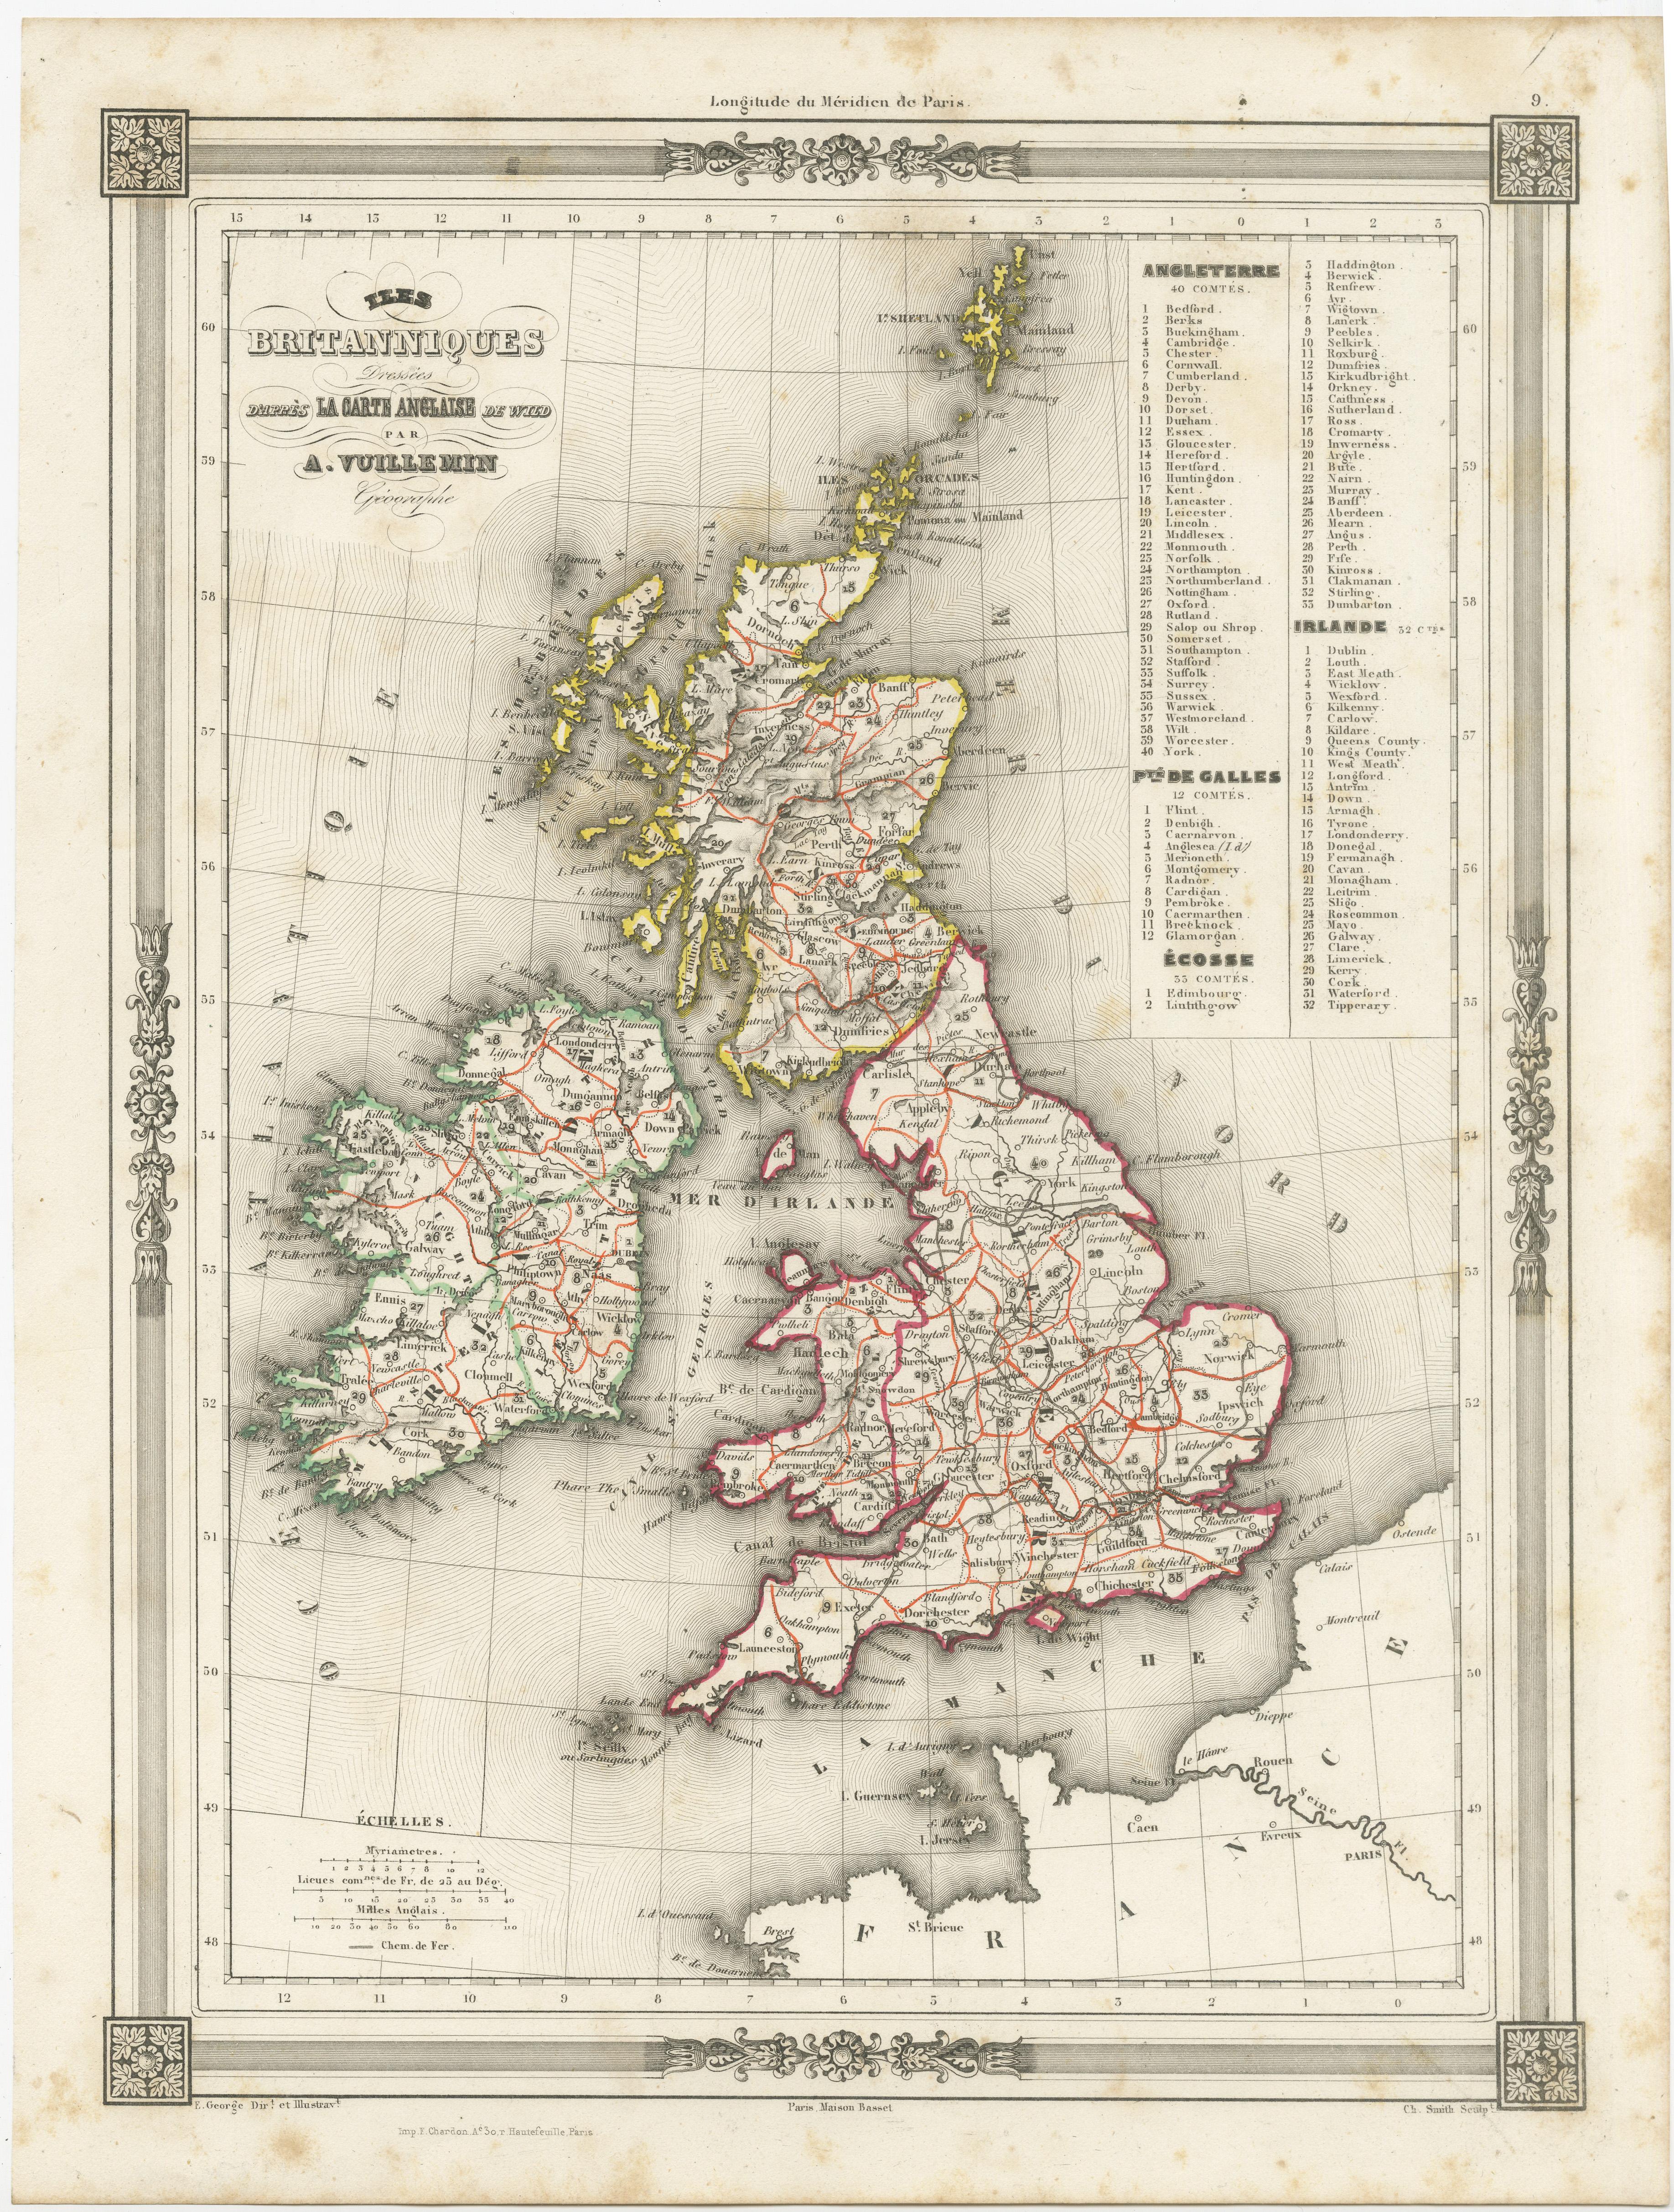 Antique map titled 'Iles Britanniques'. Attractive map of the British Isles. Details England, Scotland and Ireland as well as parts of neighboring France. Upper right corner features a list of counties which are numerically coded into the map. This